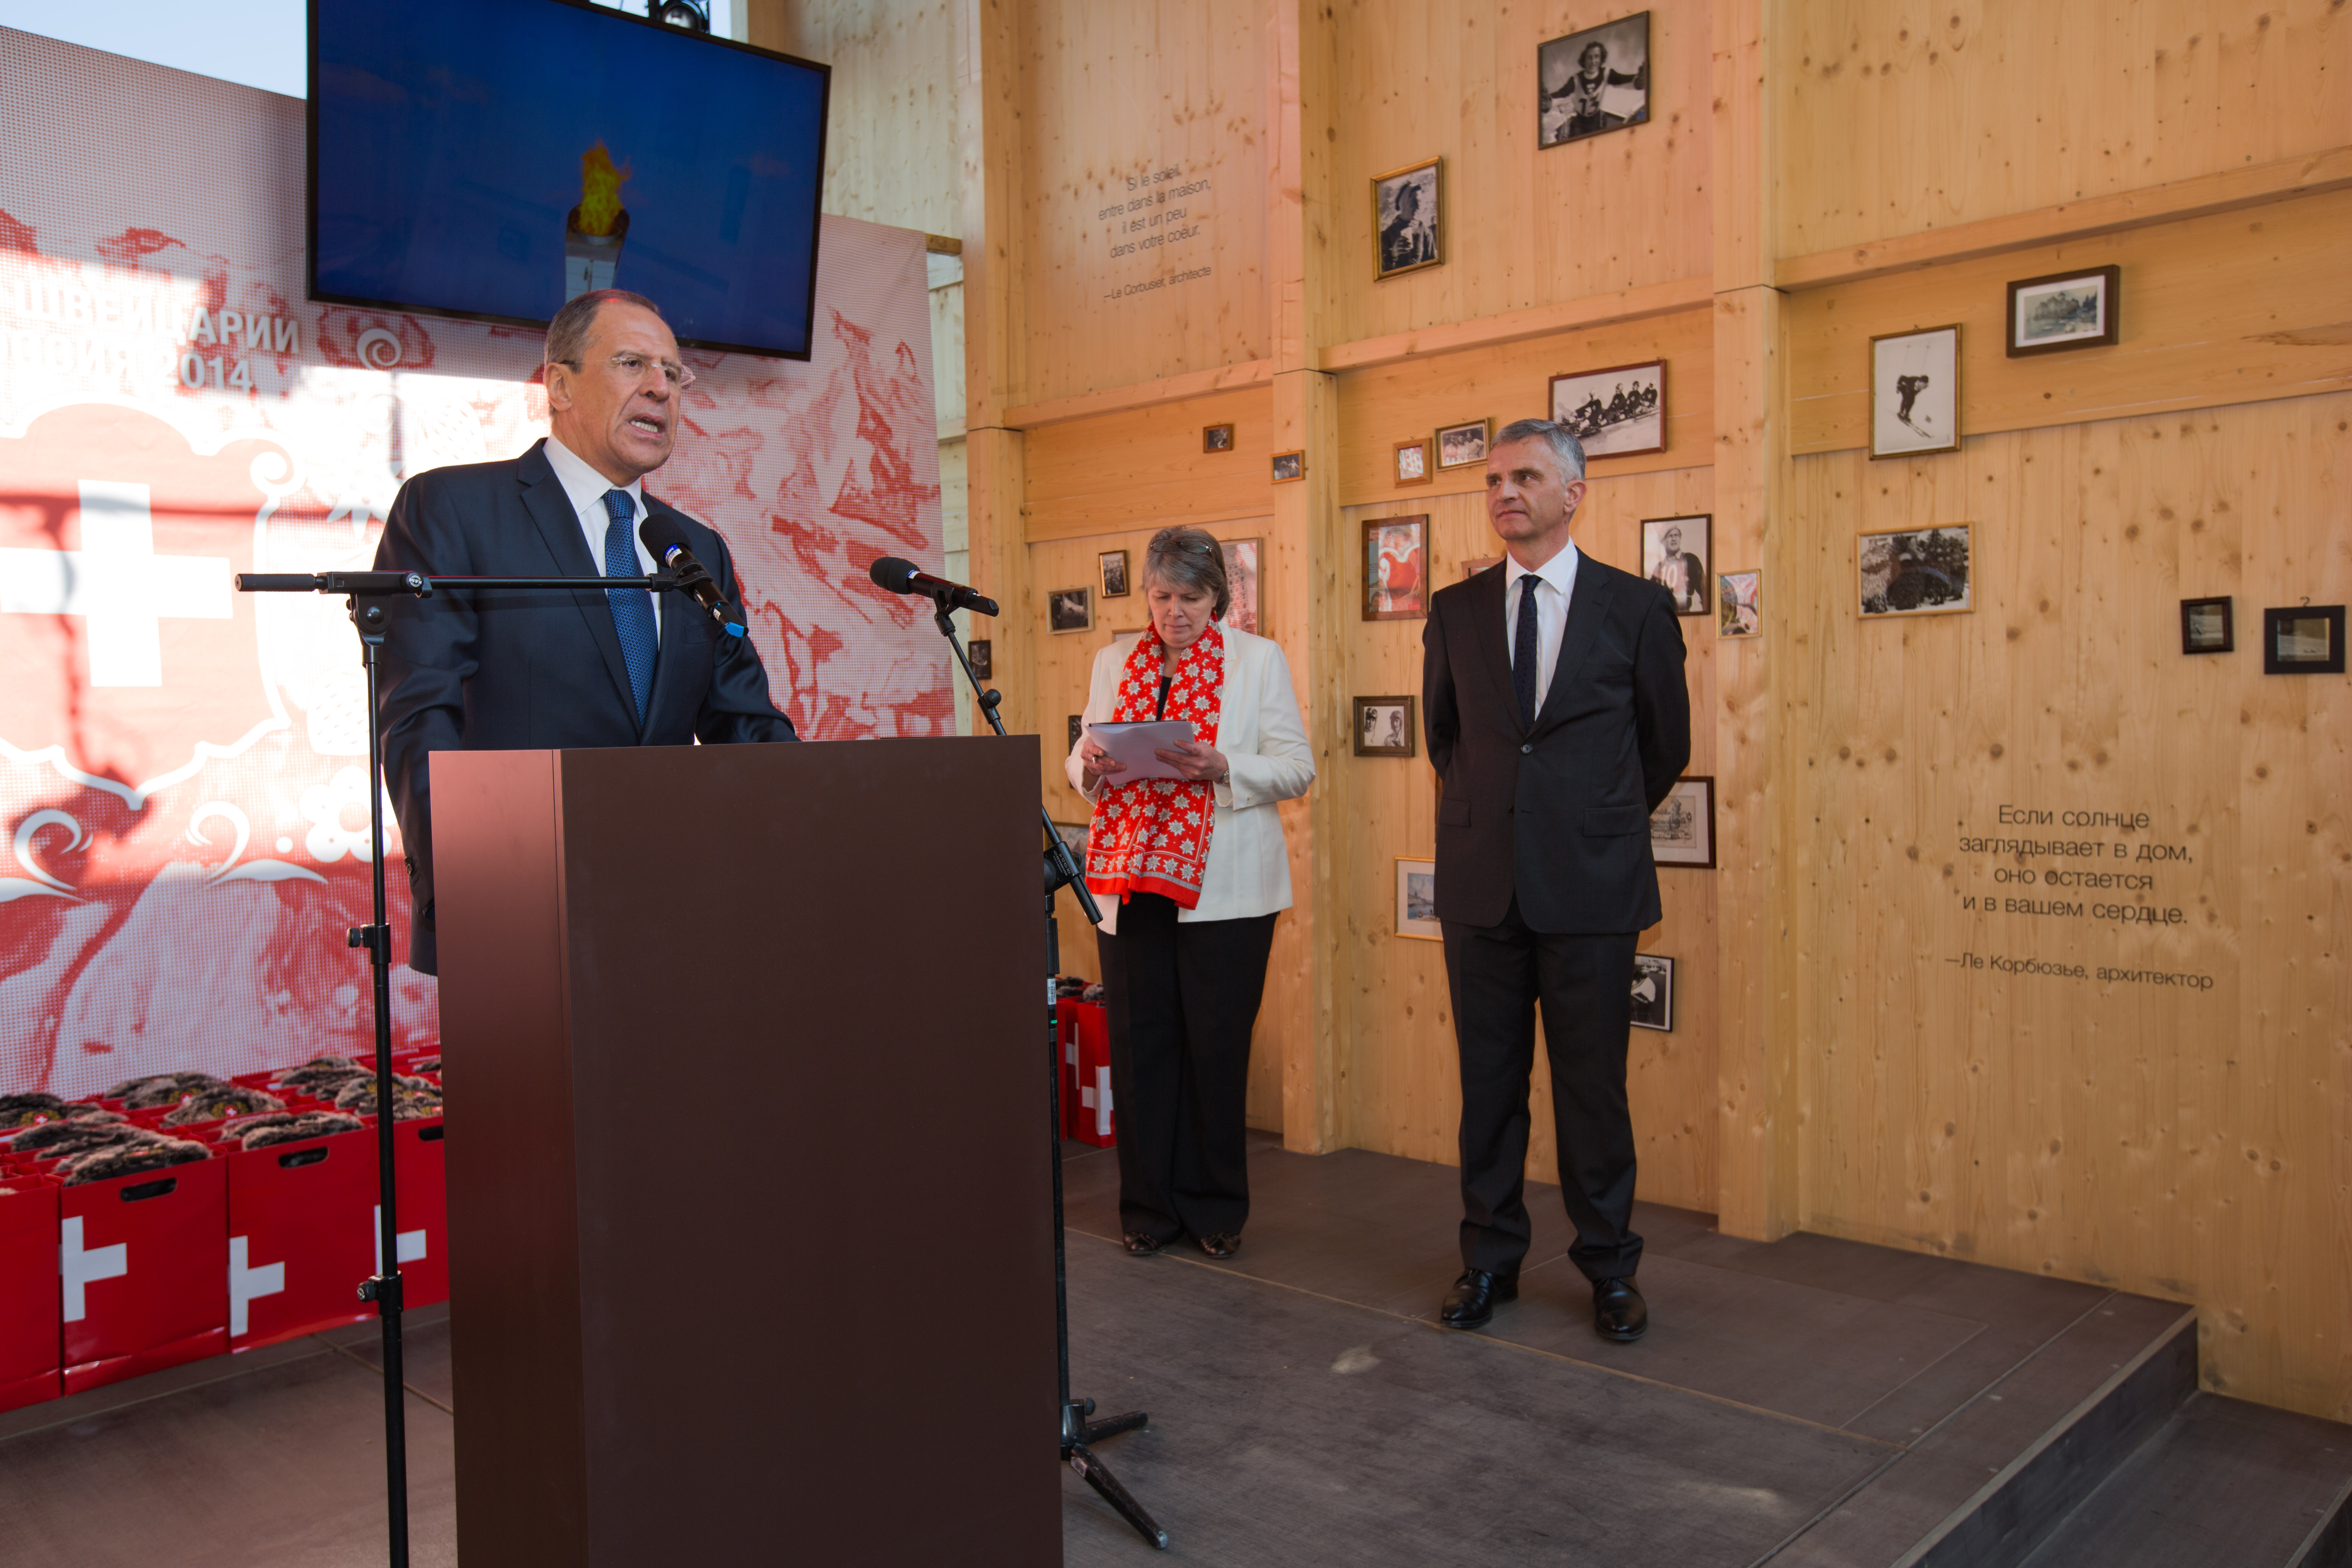 Didier Burkhalter with the Russian Foreign Minister Sergey Lavrov in the House of Switzerland.